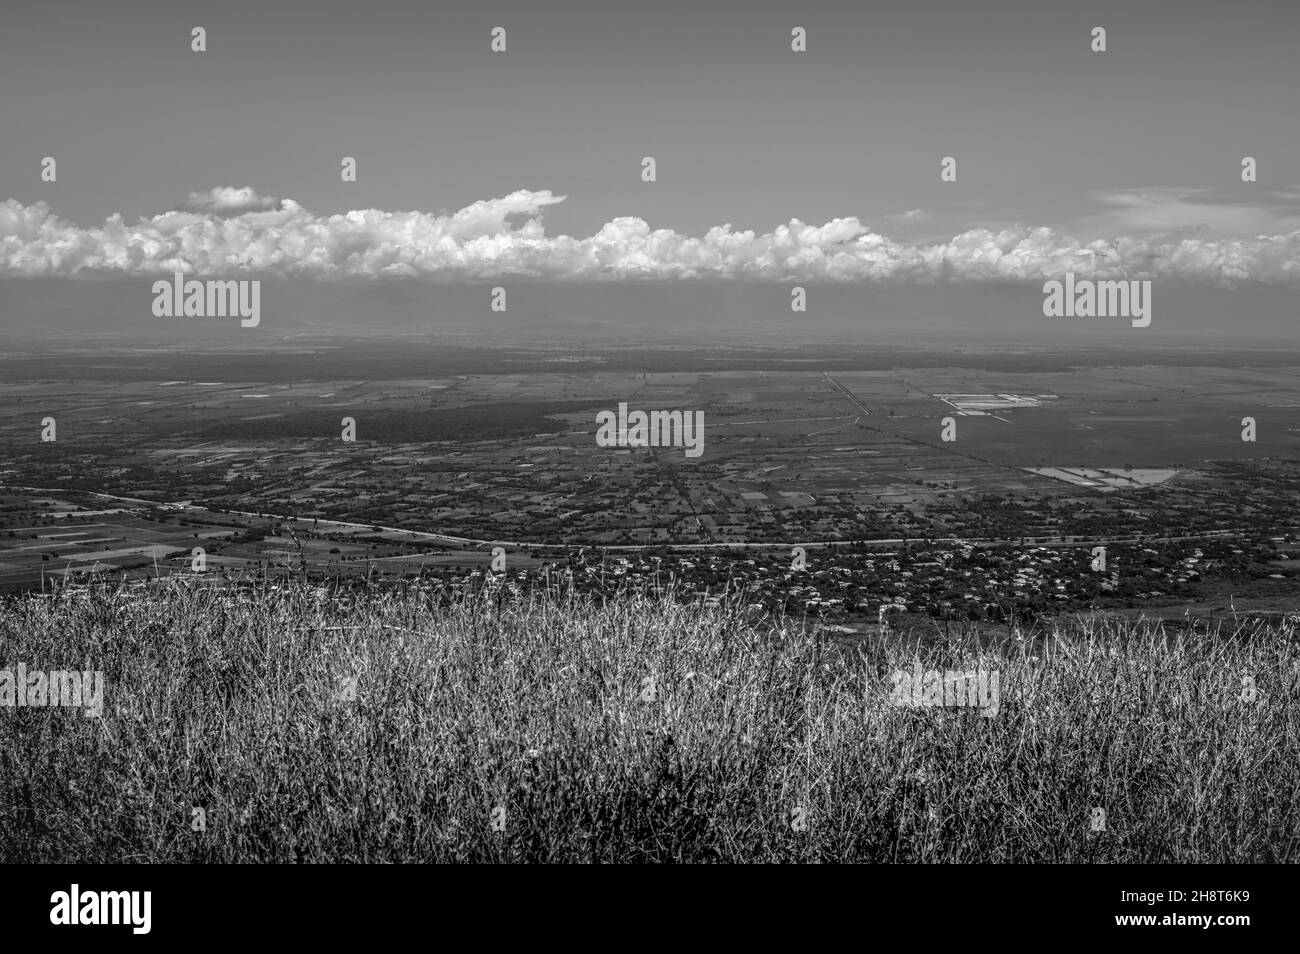 Scenic view of everlasting fields against cloudy skies in the town of Signagi. Kakheti Province, Georgia. Black and white. Stock Photo